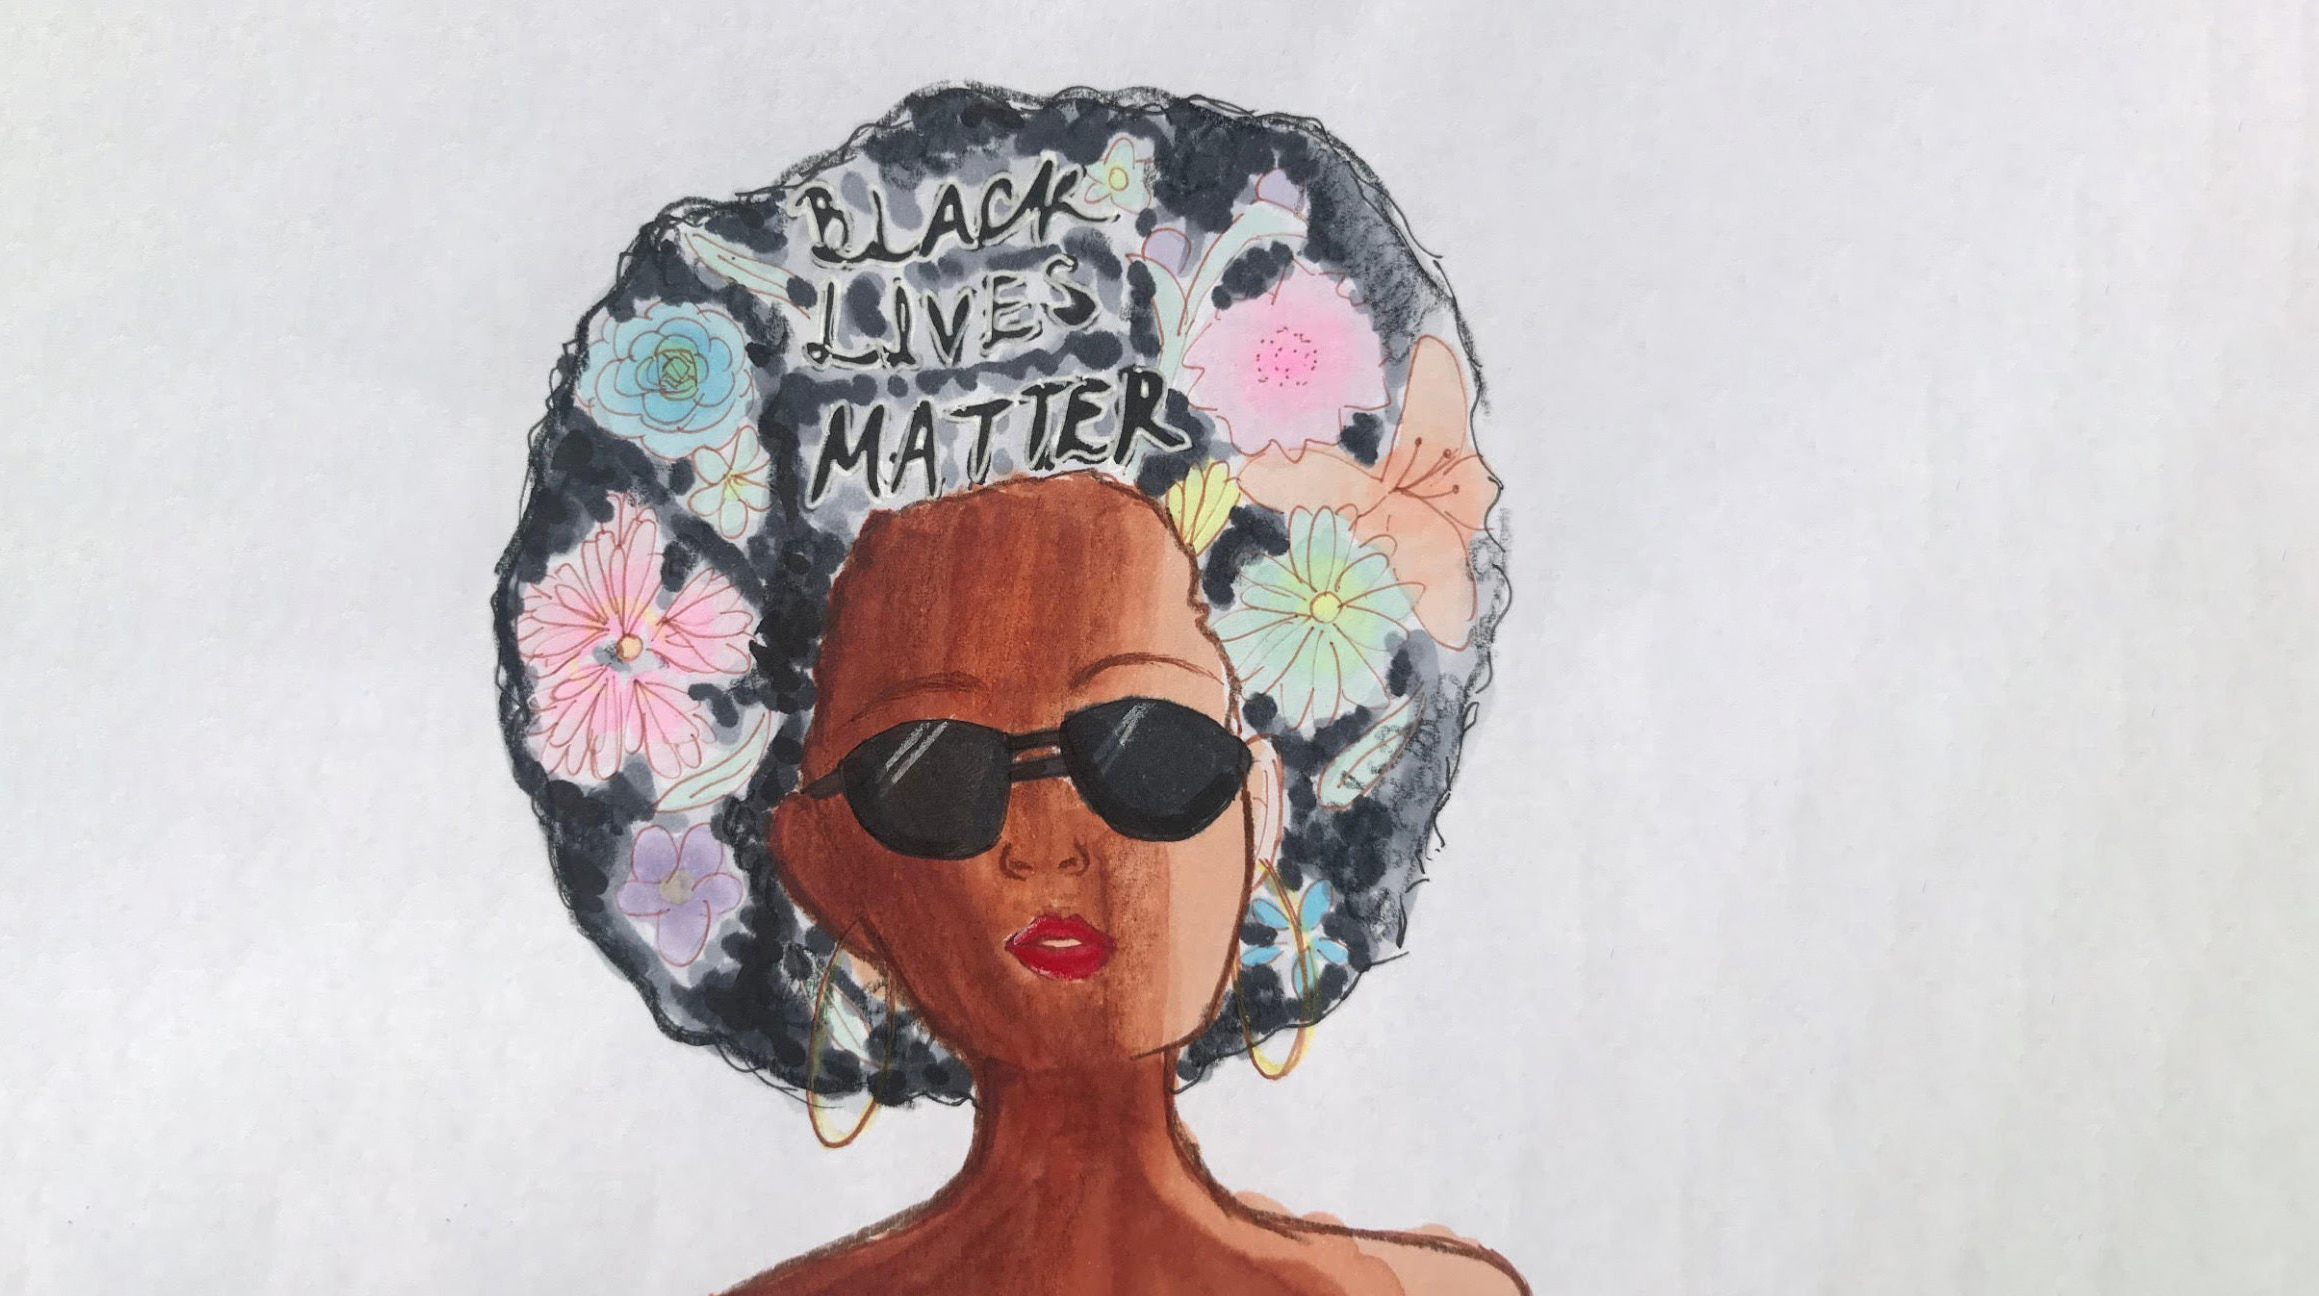 Artwork of a person with an afro, wearing sunglasses and gold hoop earrings. Pastel flowers and the words Black Lives Matter are drawn inside the afro.